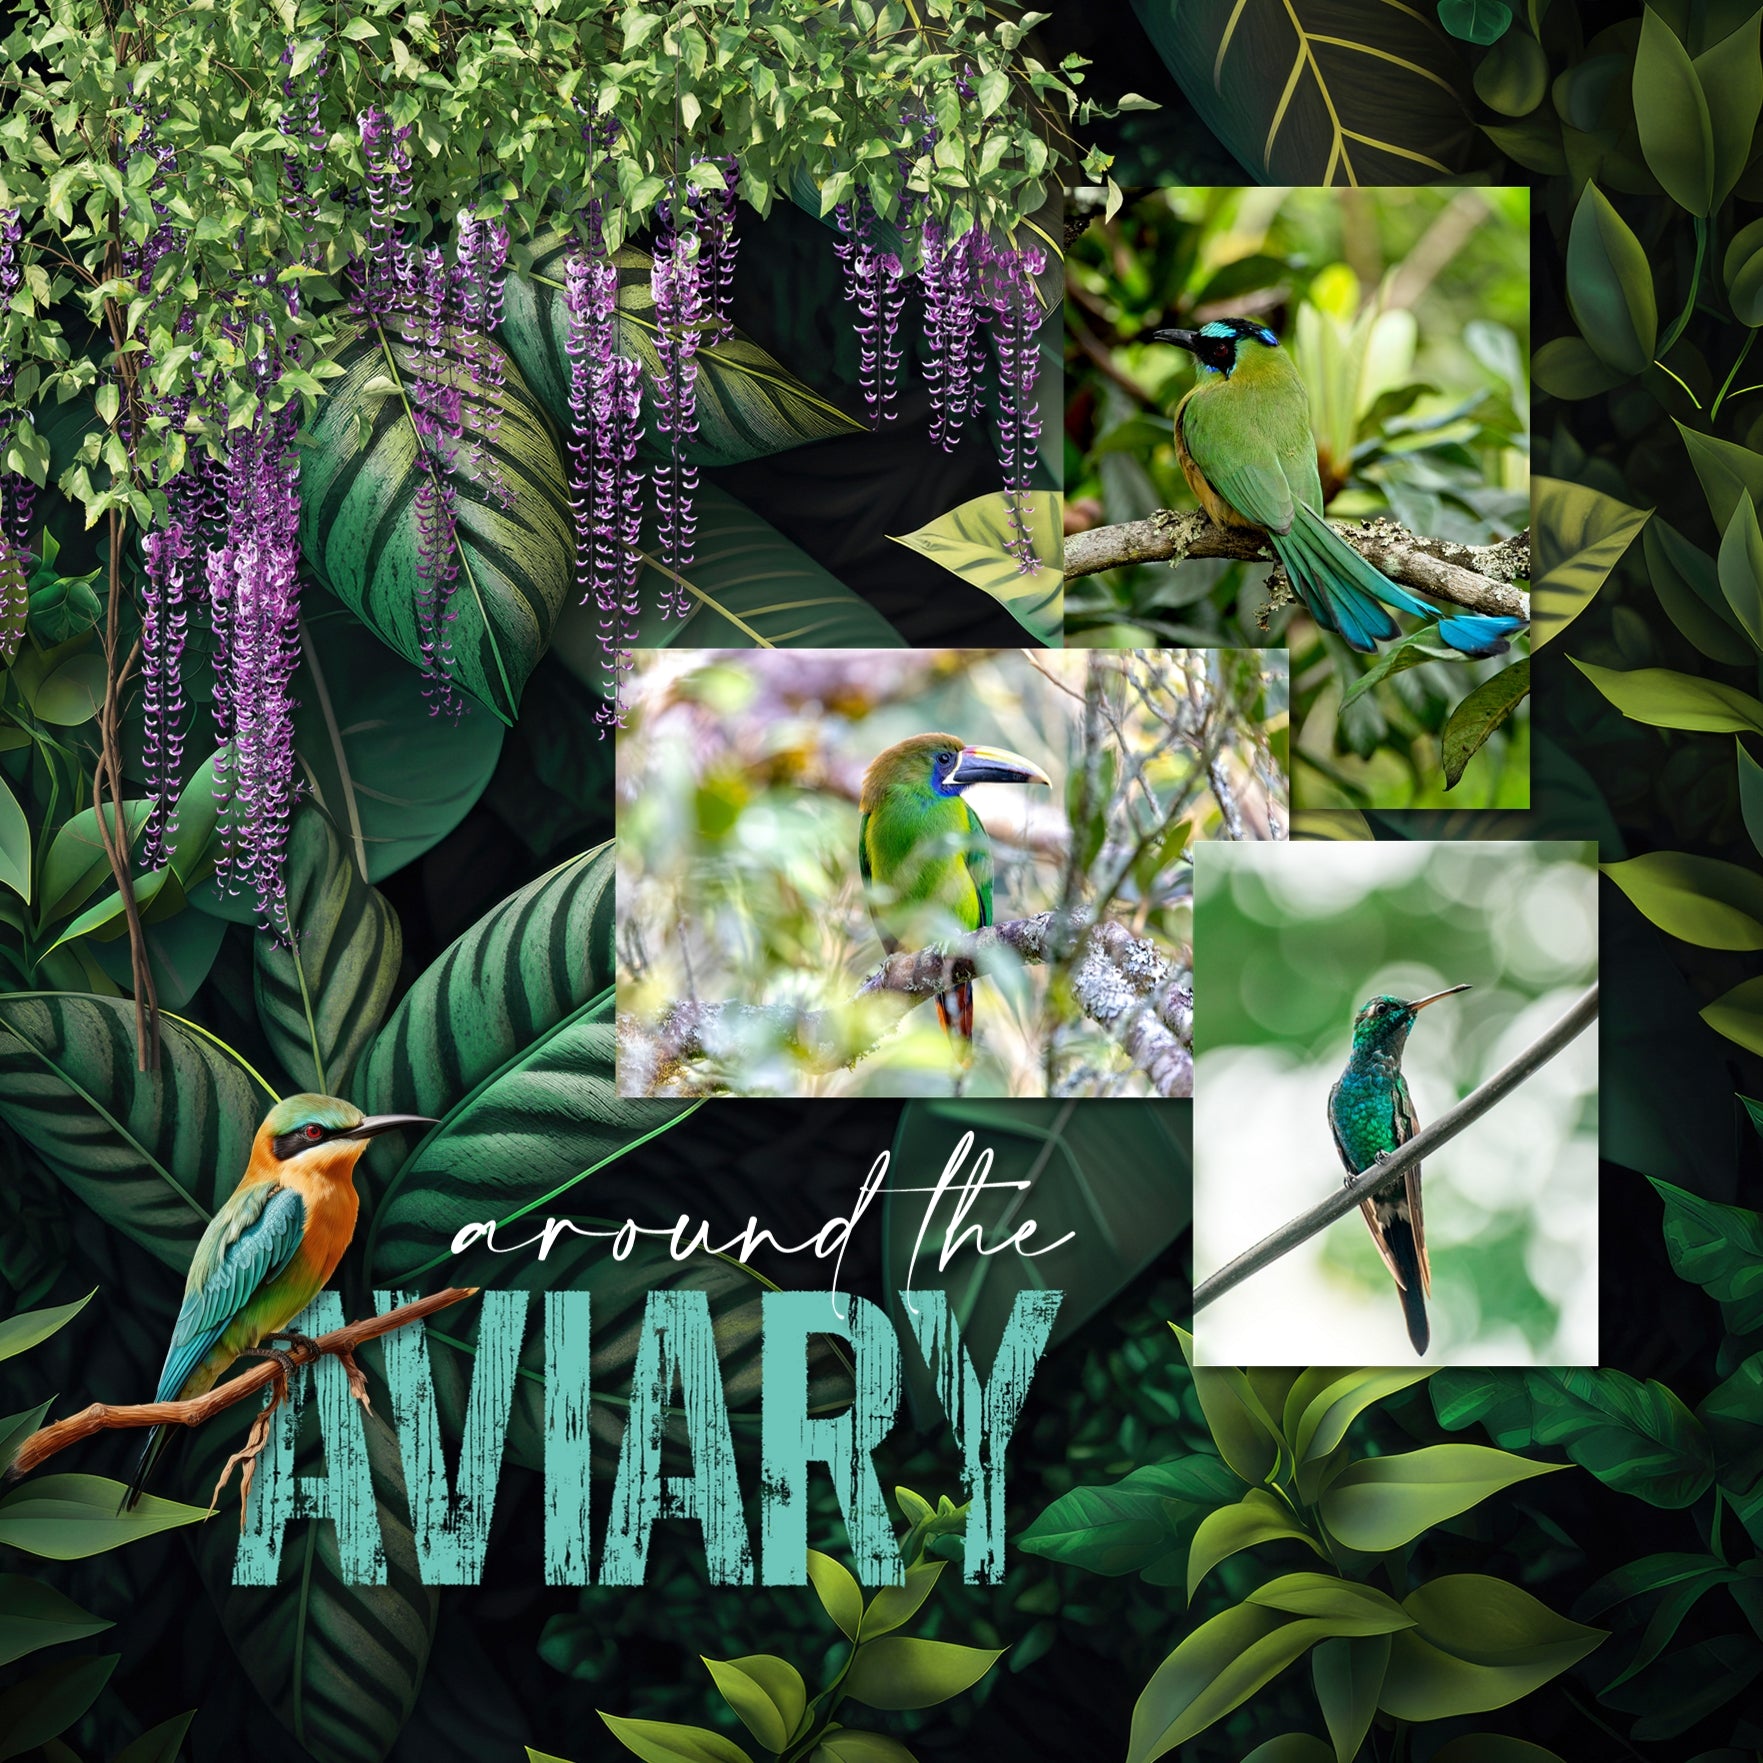 Explore nature and the outdoors with this beautiful realistic digital scrapbooking jungle flora and fauna embellishment kit by Lucky Girl Creative digital art. Great for tropical vacations, hiking, camping, nature walks, the zoo, and more. Embellishments include bird, cockatoo, hummingbird, parrot, peacock, toucan, capybara, crab, crocodile, alligator, fish, frog, lizard, reptile, bug, insect, beetle, ant, dragonfly, ladybug, mosquito, spider, monkey, chimpanzee, Proboscis, Orangutan, panther, and more.